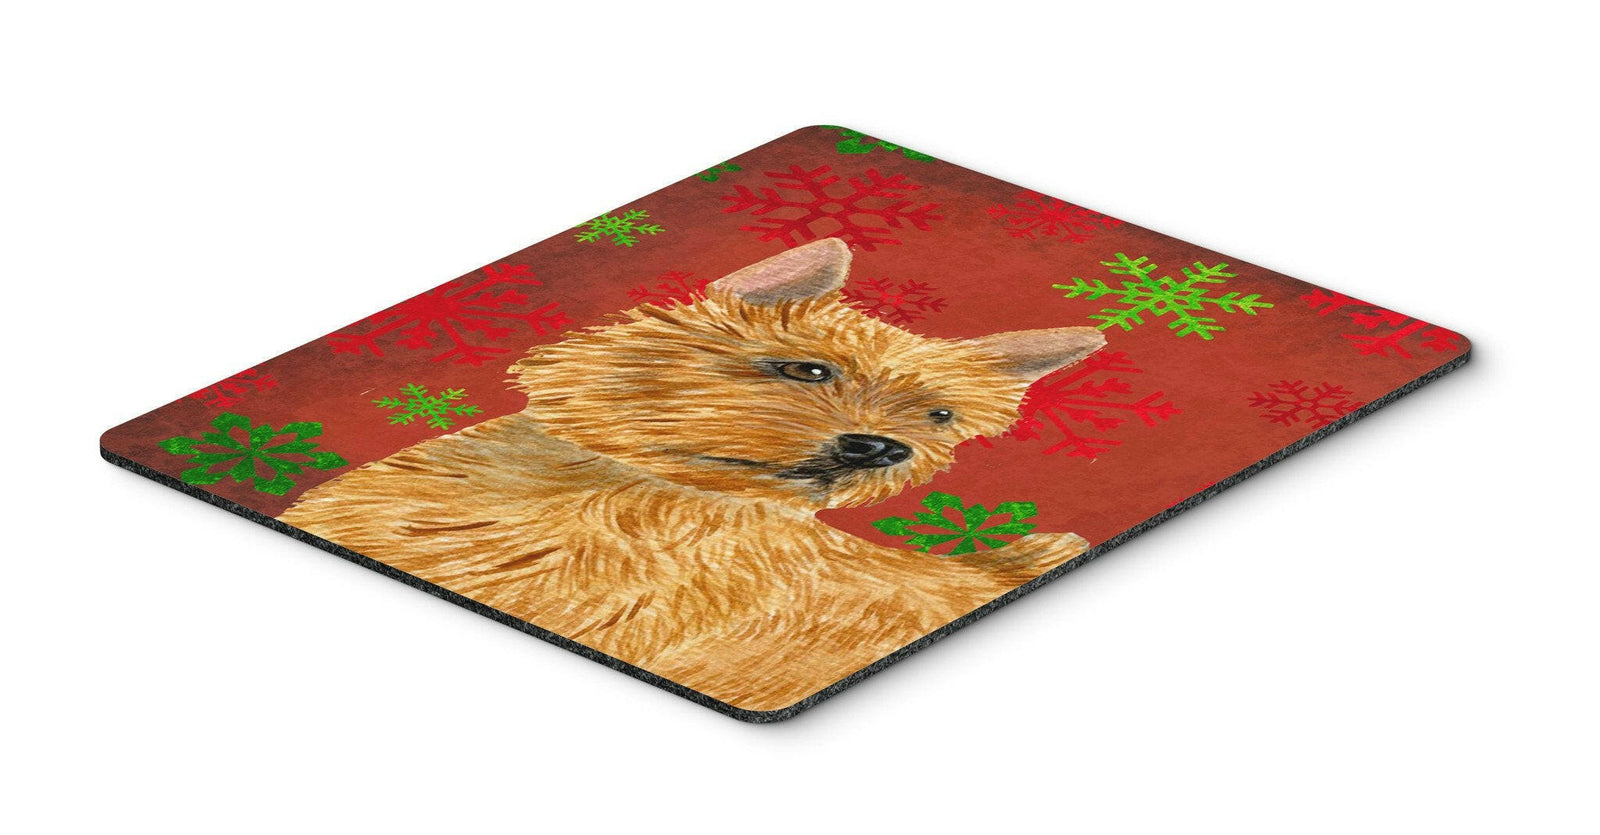 Norwich Terrier Snowflakes Holiday Christmas Mouse Pad, Hot Pad or Trivet by Caroline's Treasures